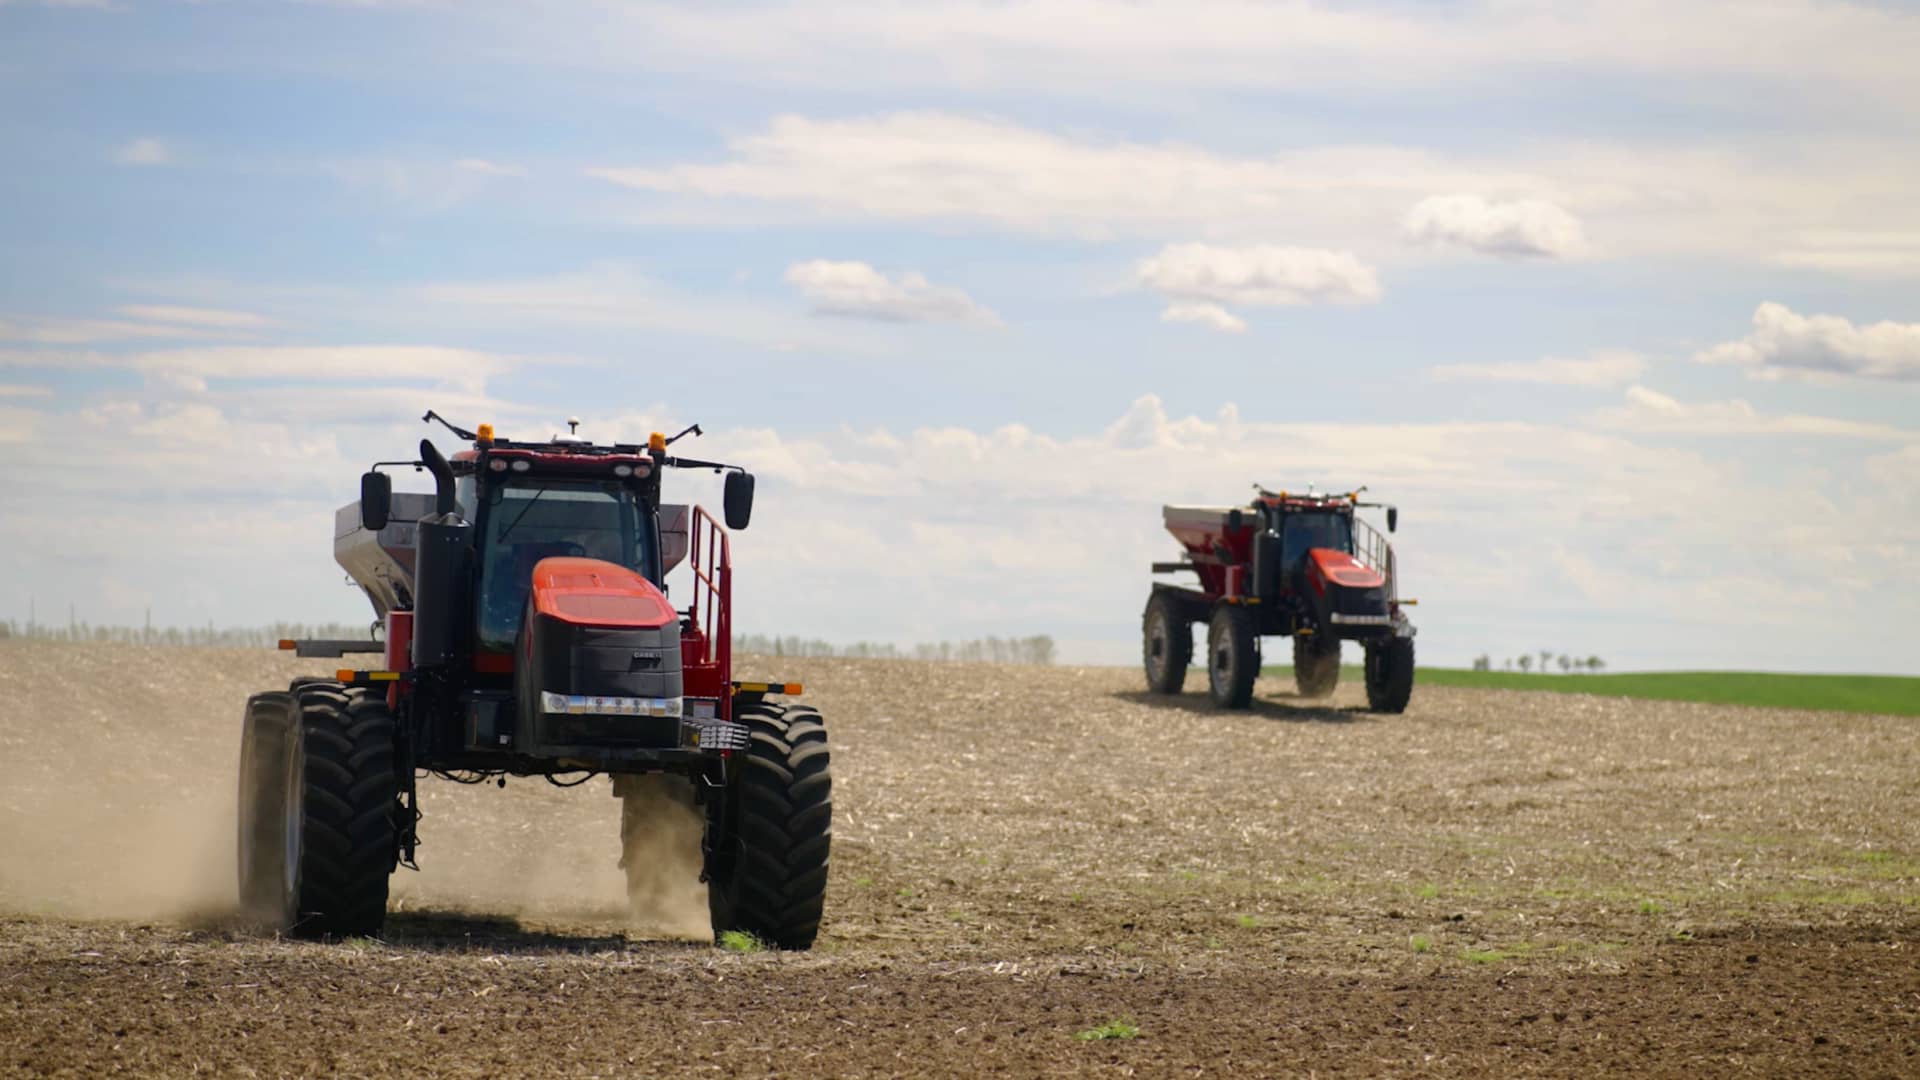 The Trident 5550 is designed for spreading materials in farm fields. Retrofitted with autonomous technology developed by Raven Industries, which CNH acquired for $2.1 billion in June 2021, the enhanced Trident employs self-driving, advanced cameras and AI to interpret a continuous stream of images to detect obstacles.